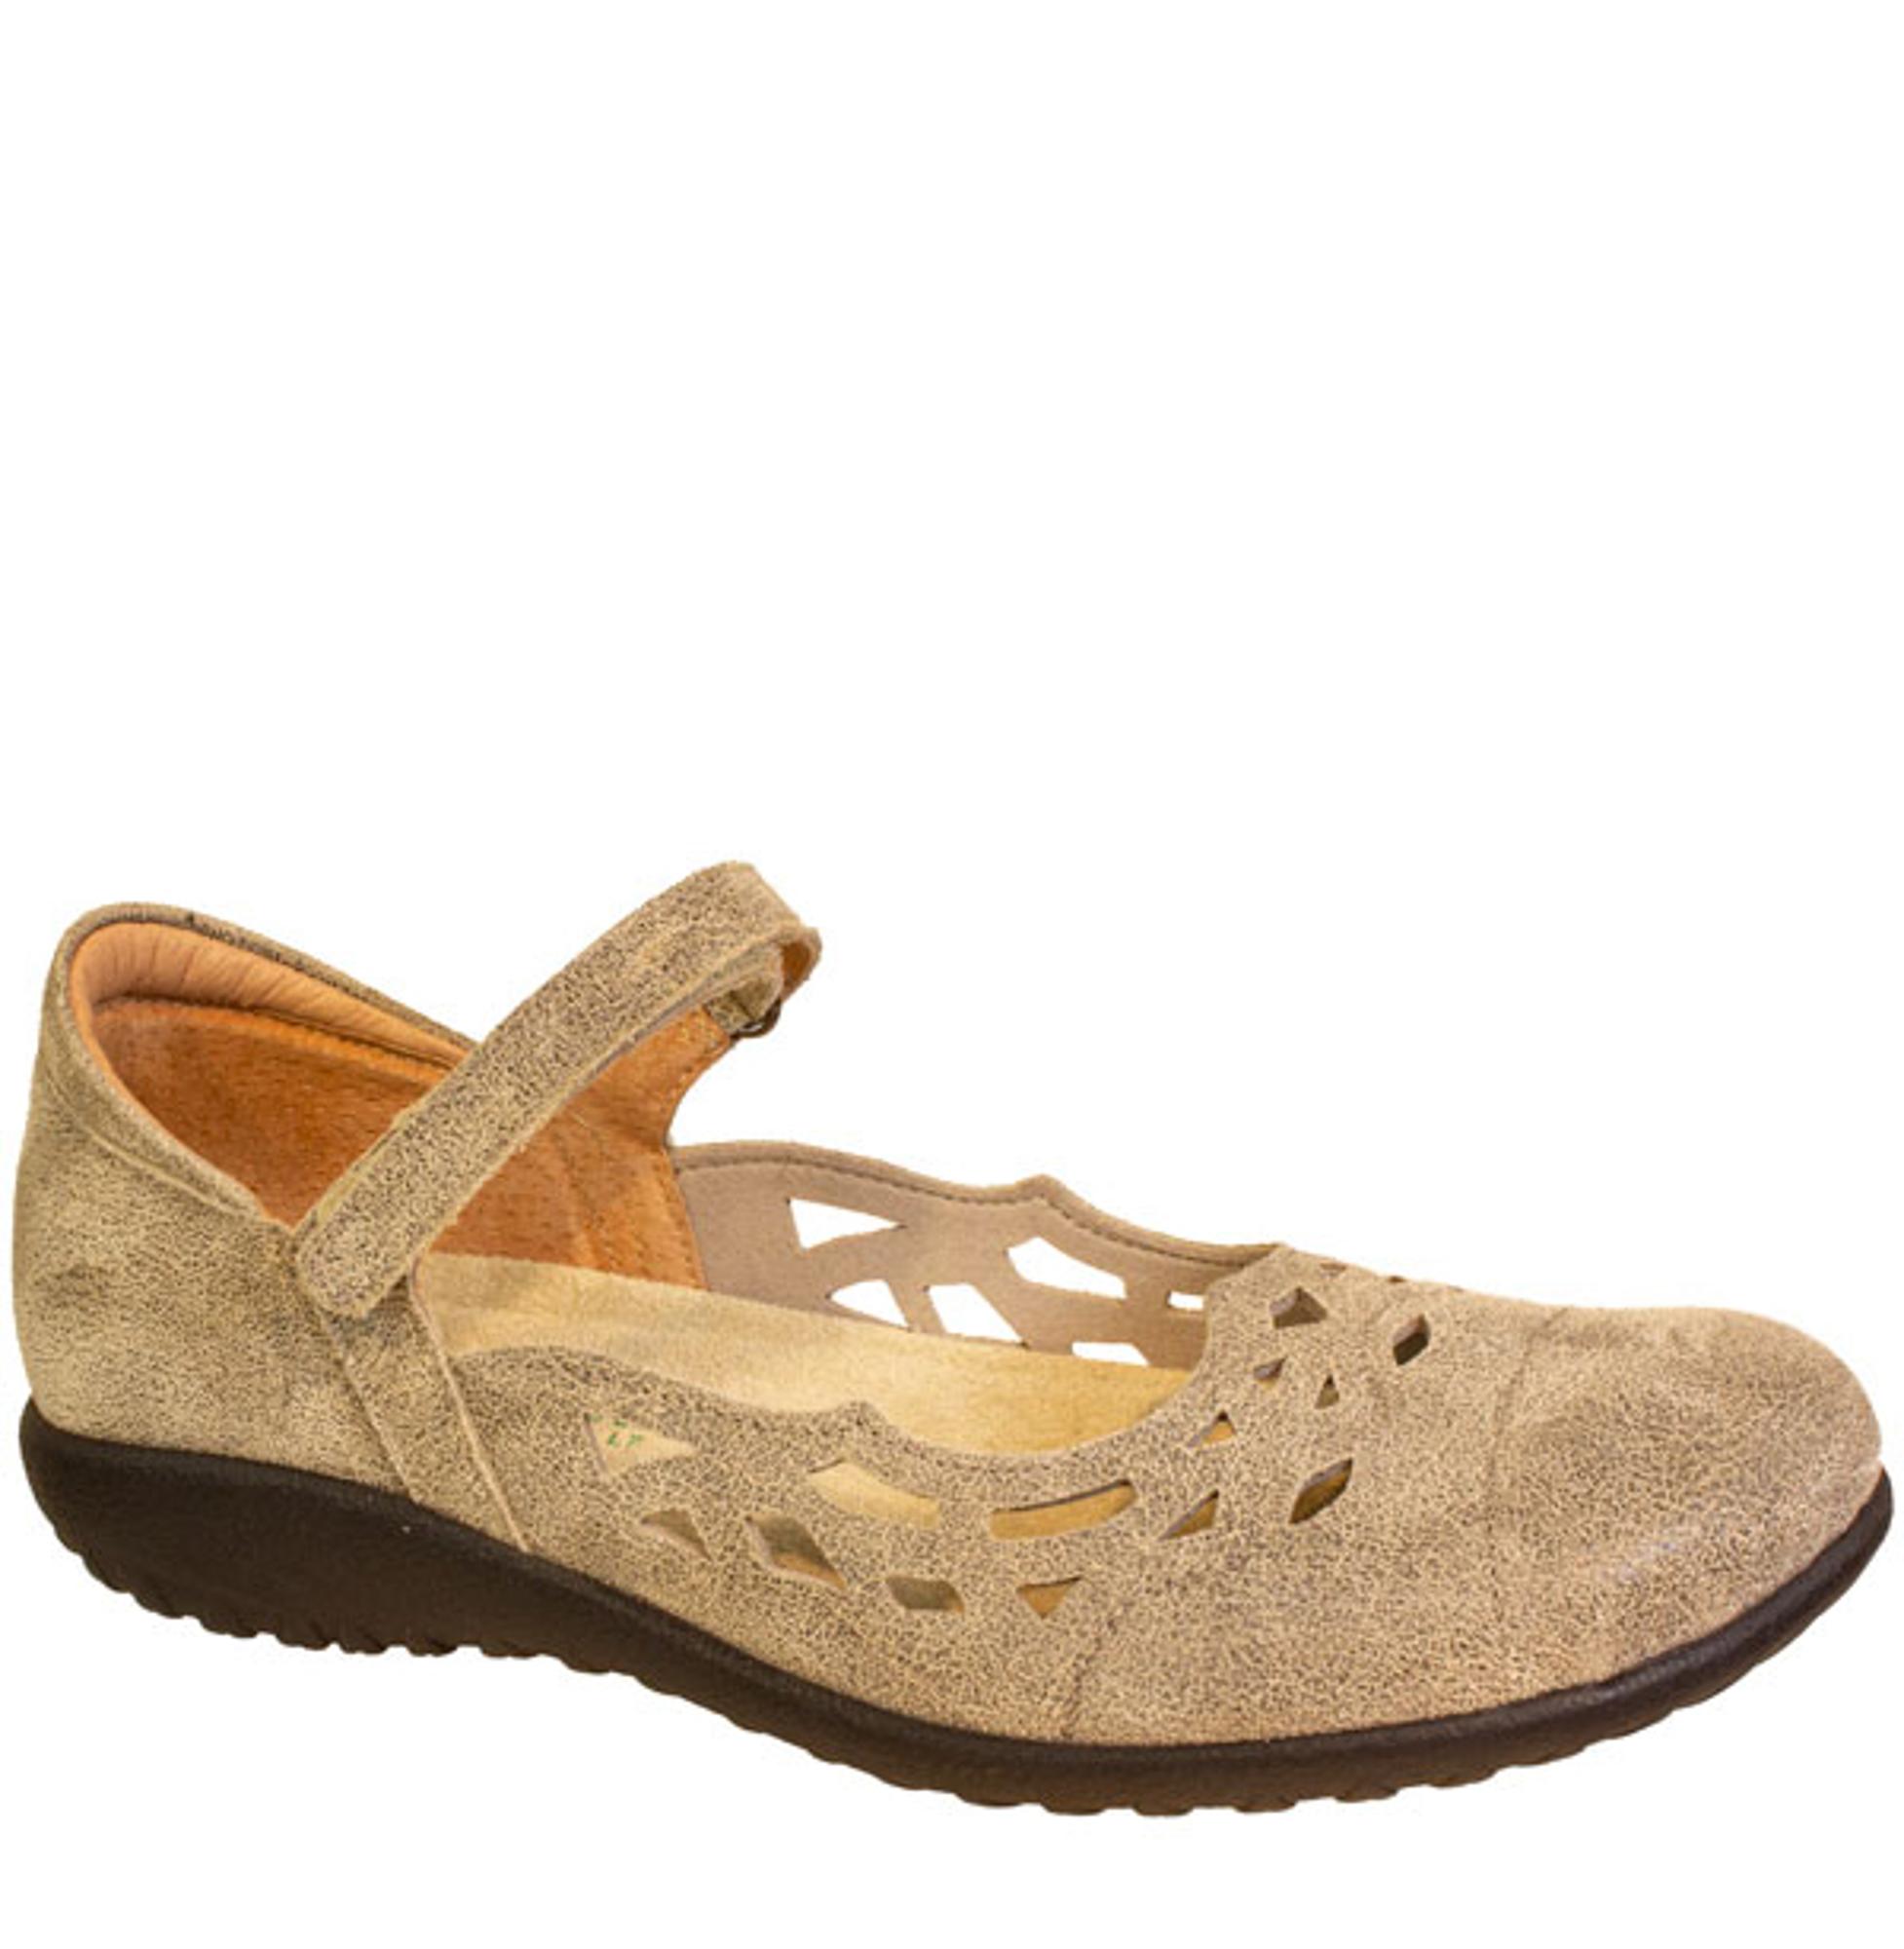 Womens AGATHIS / Speckled Beige leather 